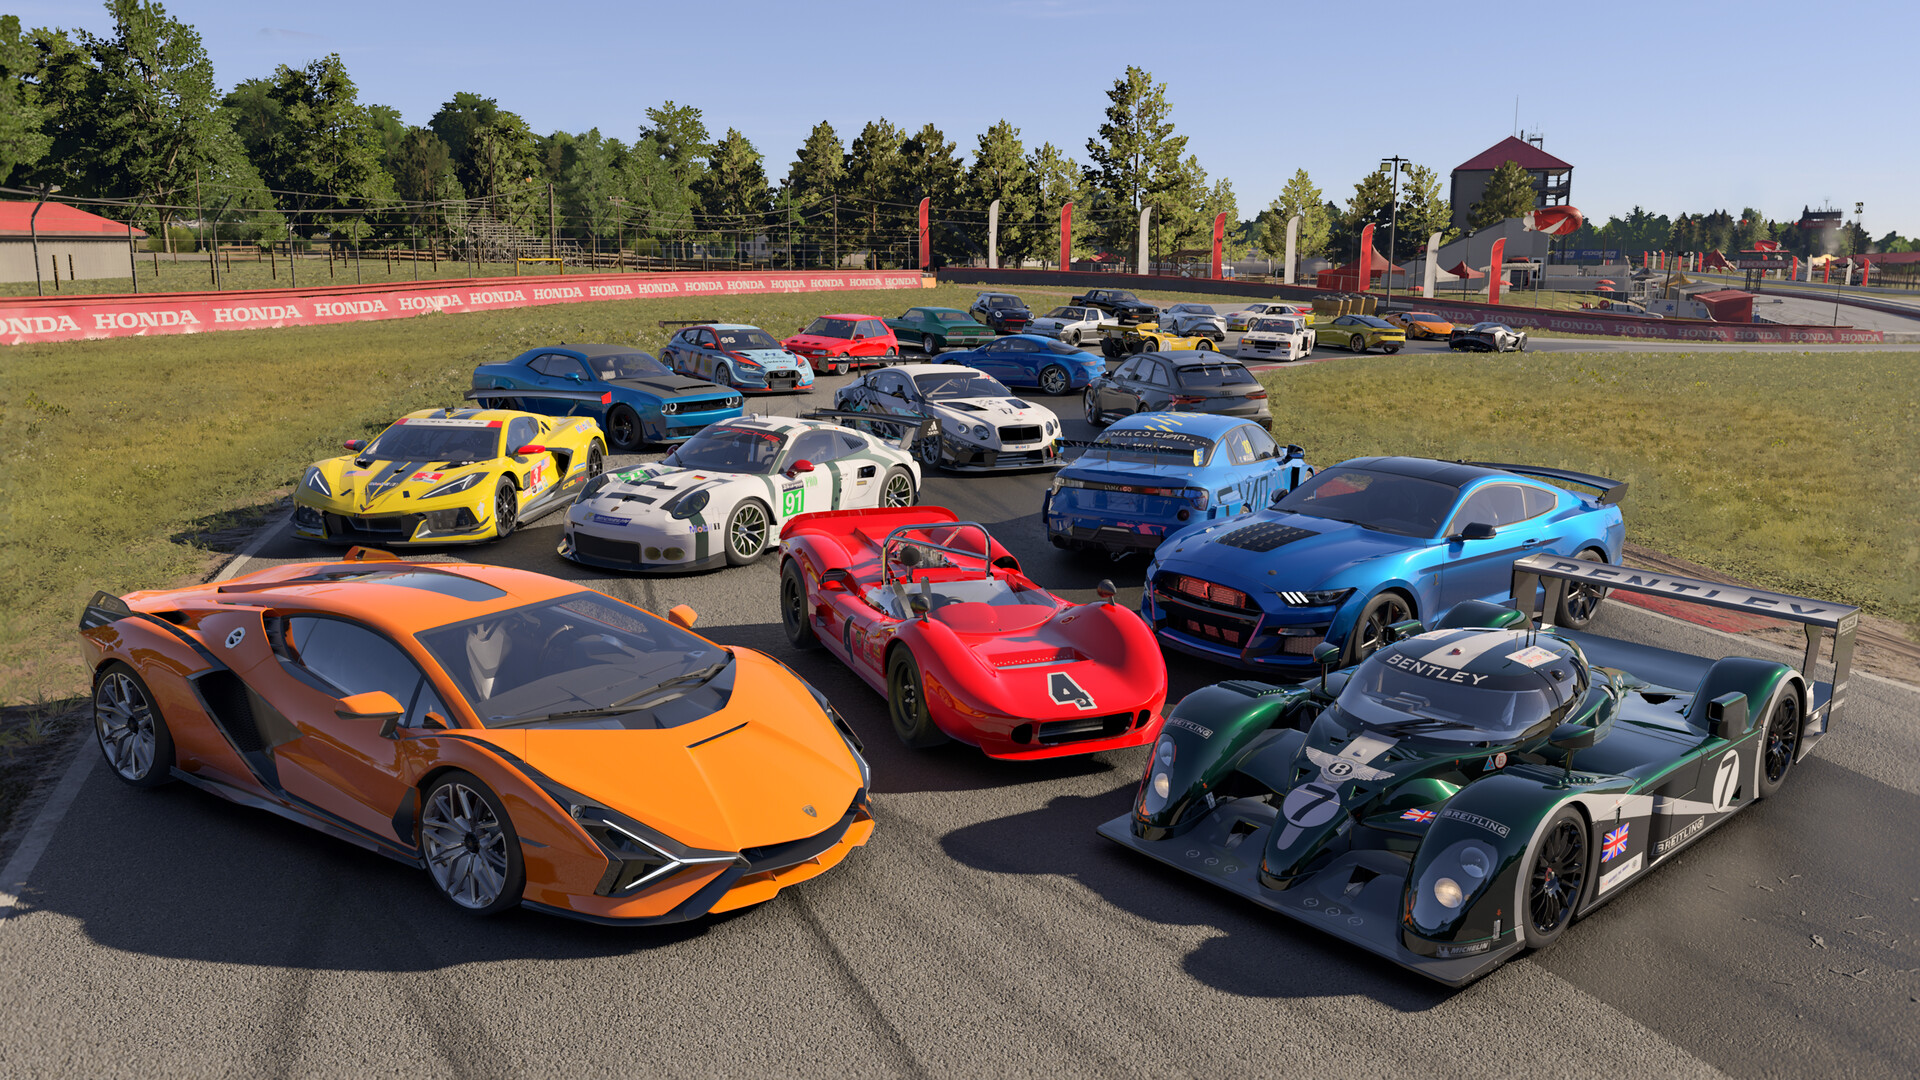 An epic 24 hours with Forza Motorsport 4 - The AI Blog